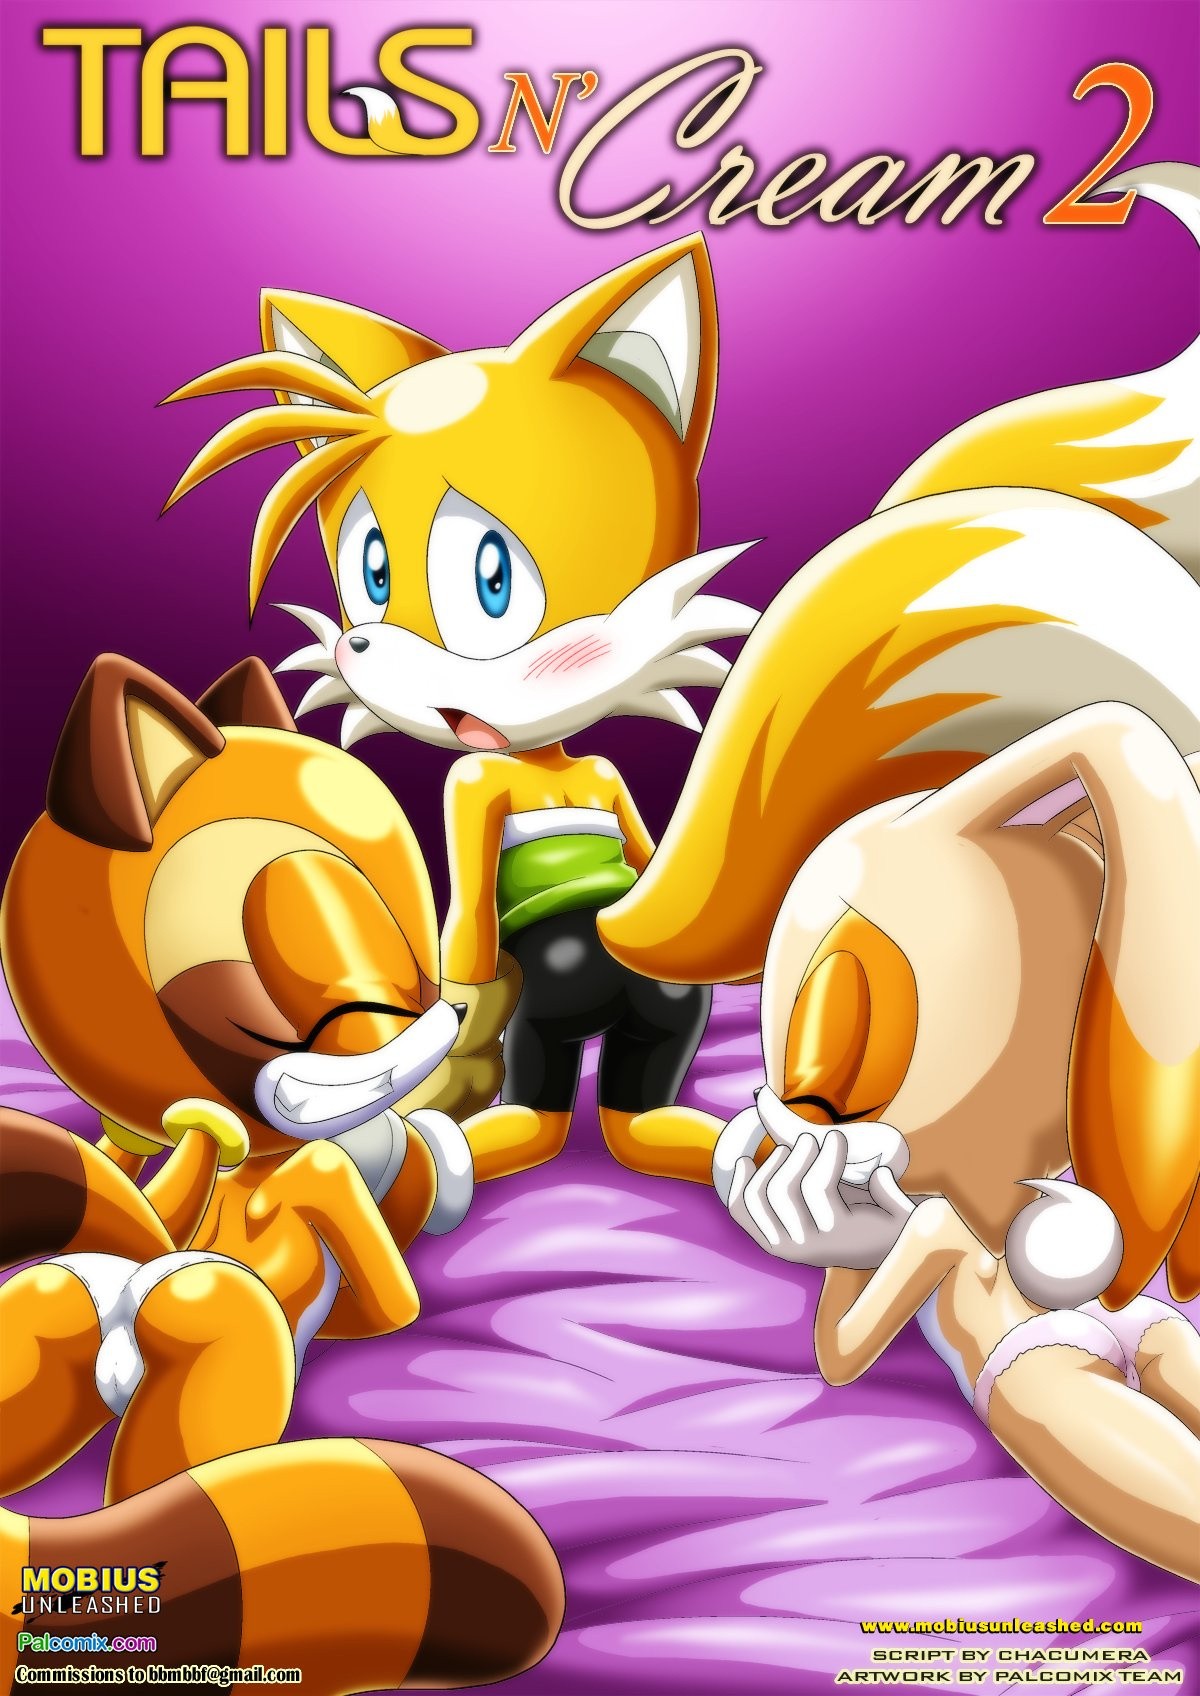 Tails and Cream 2